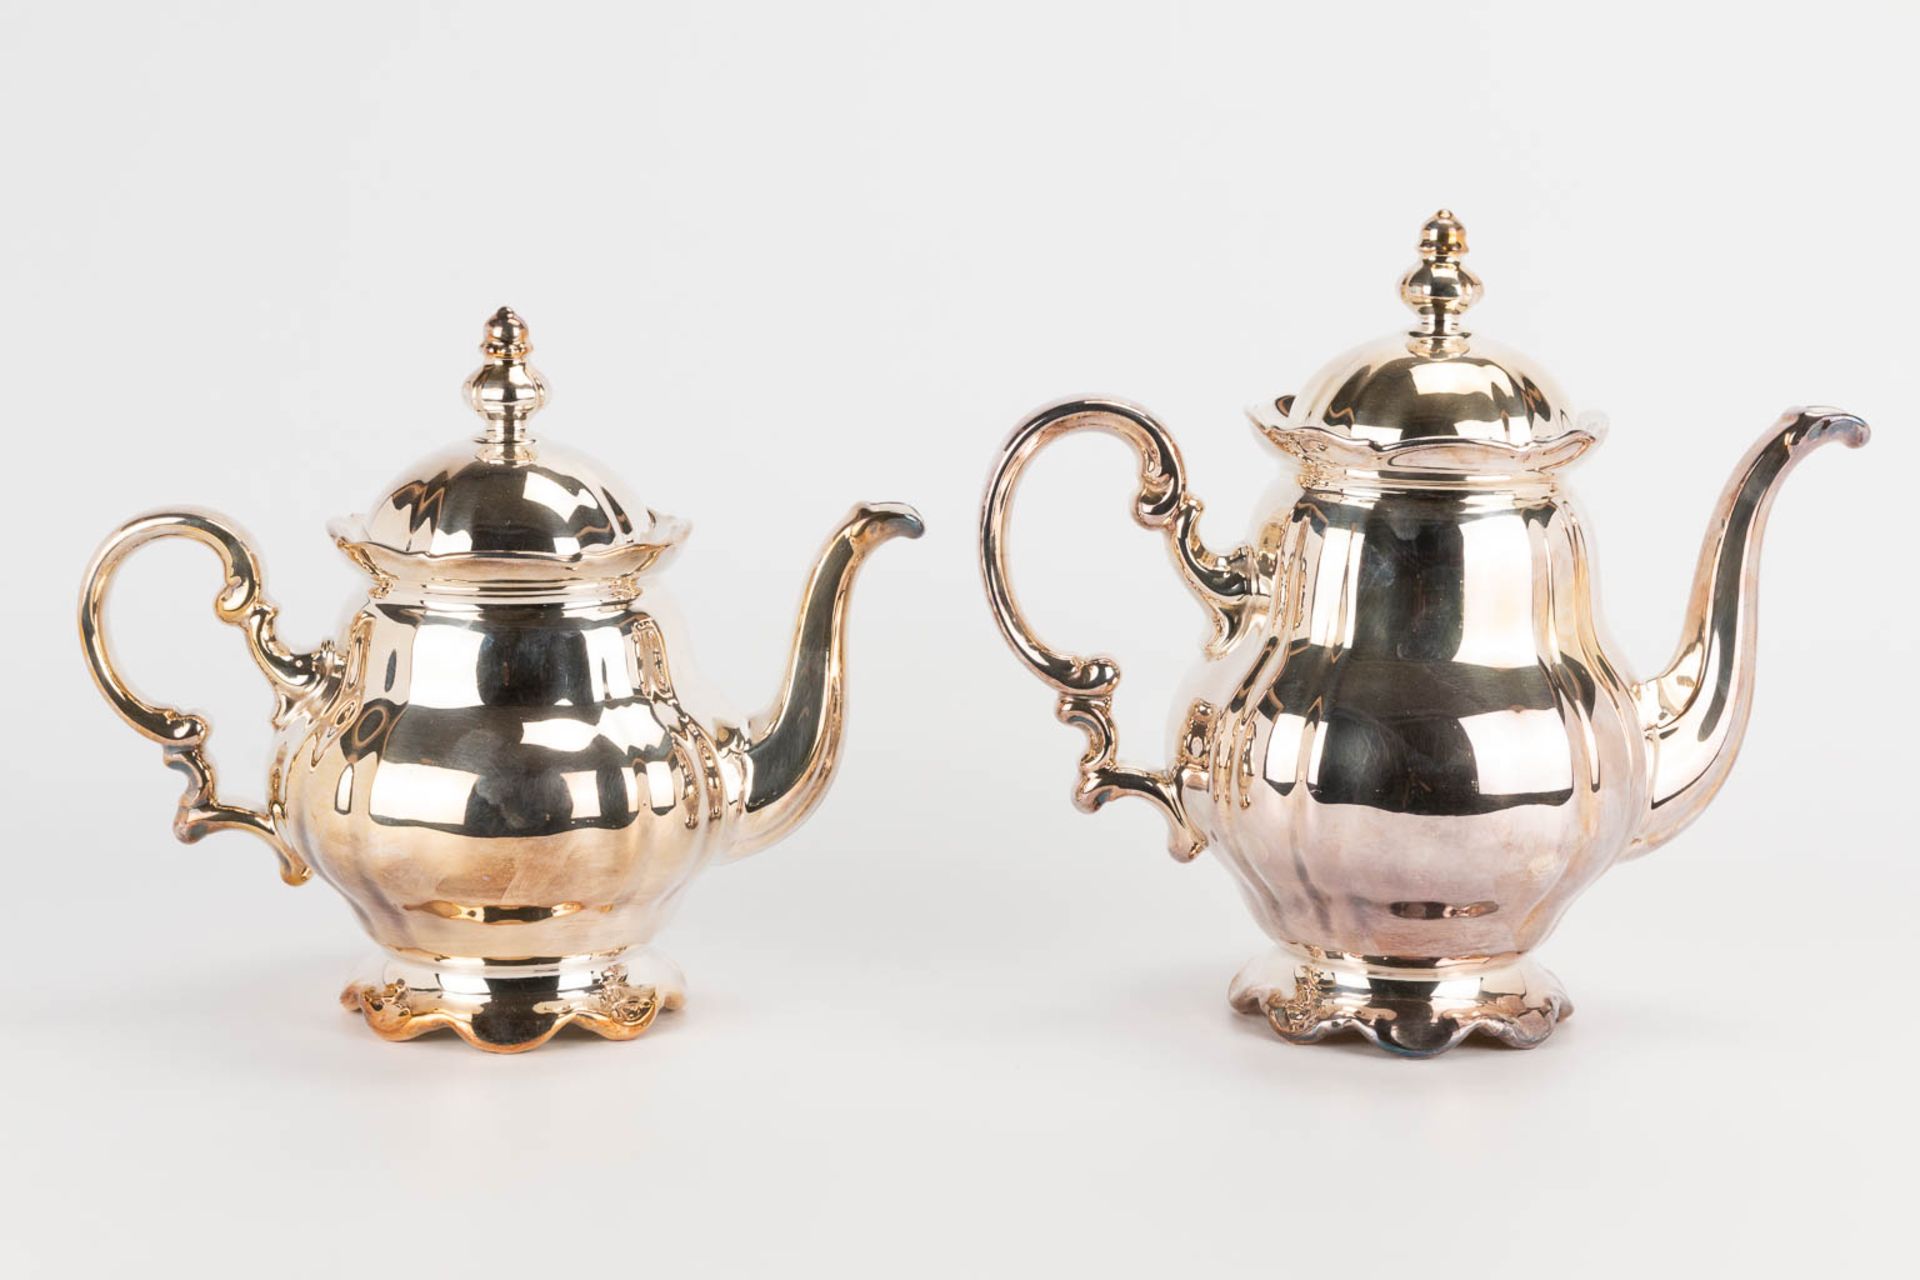 A coffee and tea service made of silver-plated porcelain. Not marked. (13 x 28 x 25 cm) - Bild 4 aus 9